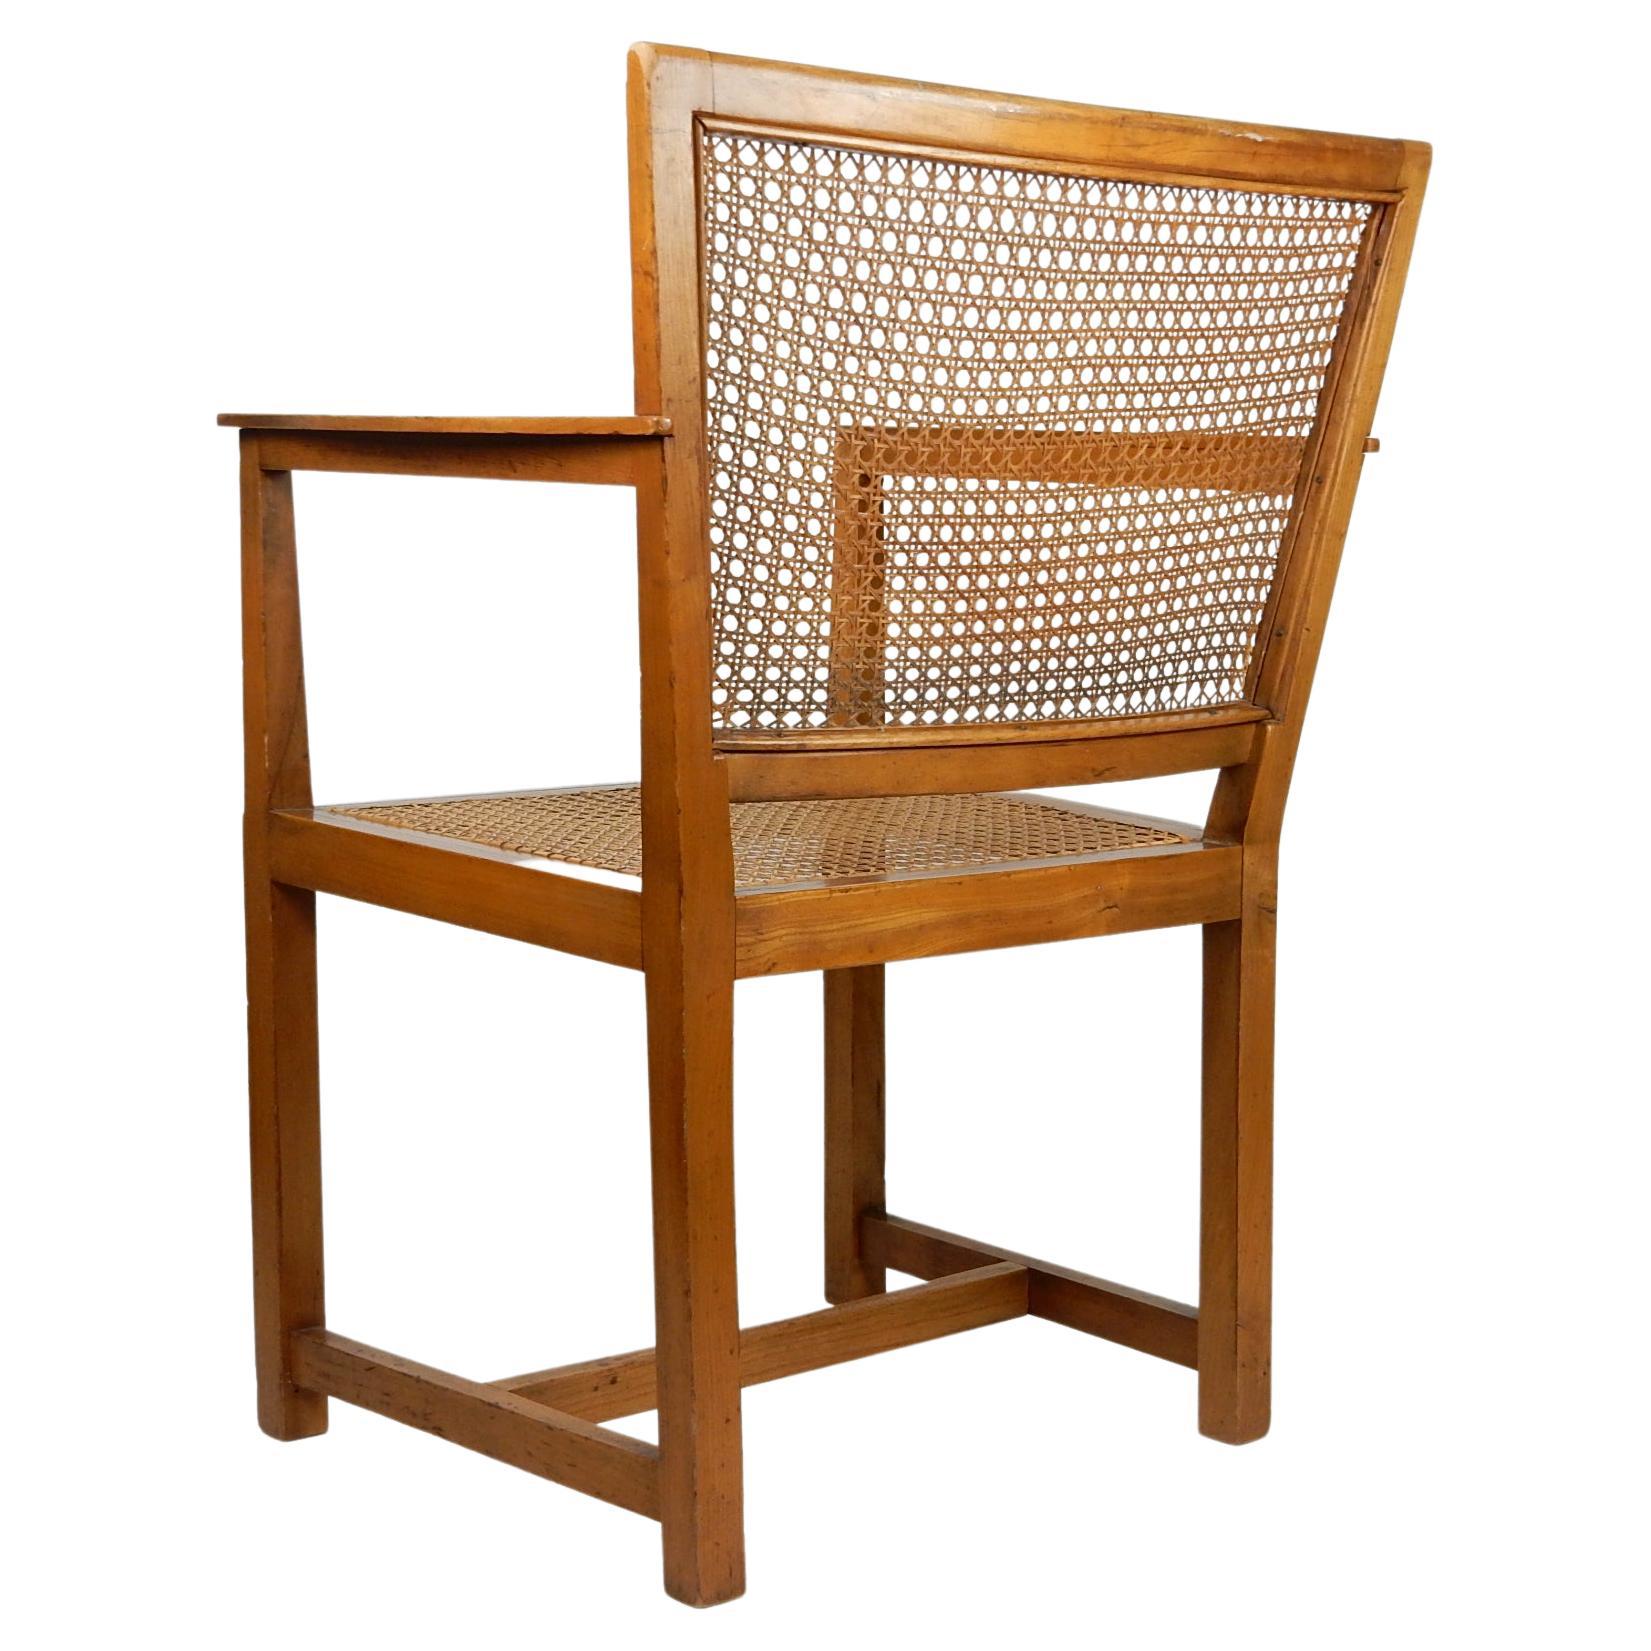 Oskar Strnad (1879-1935) Vienna, Austria architect, designed yellow Pine & cane arm chair. 
Circa 1920's. Exceptionally rare, museum piece.
Provenance, purchased from the Strnad family estate (his niece, of Tucson Arizona).
Was told it was his